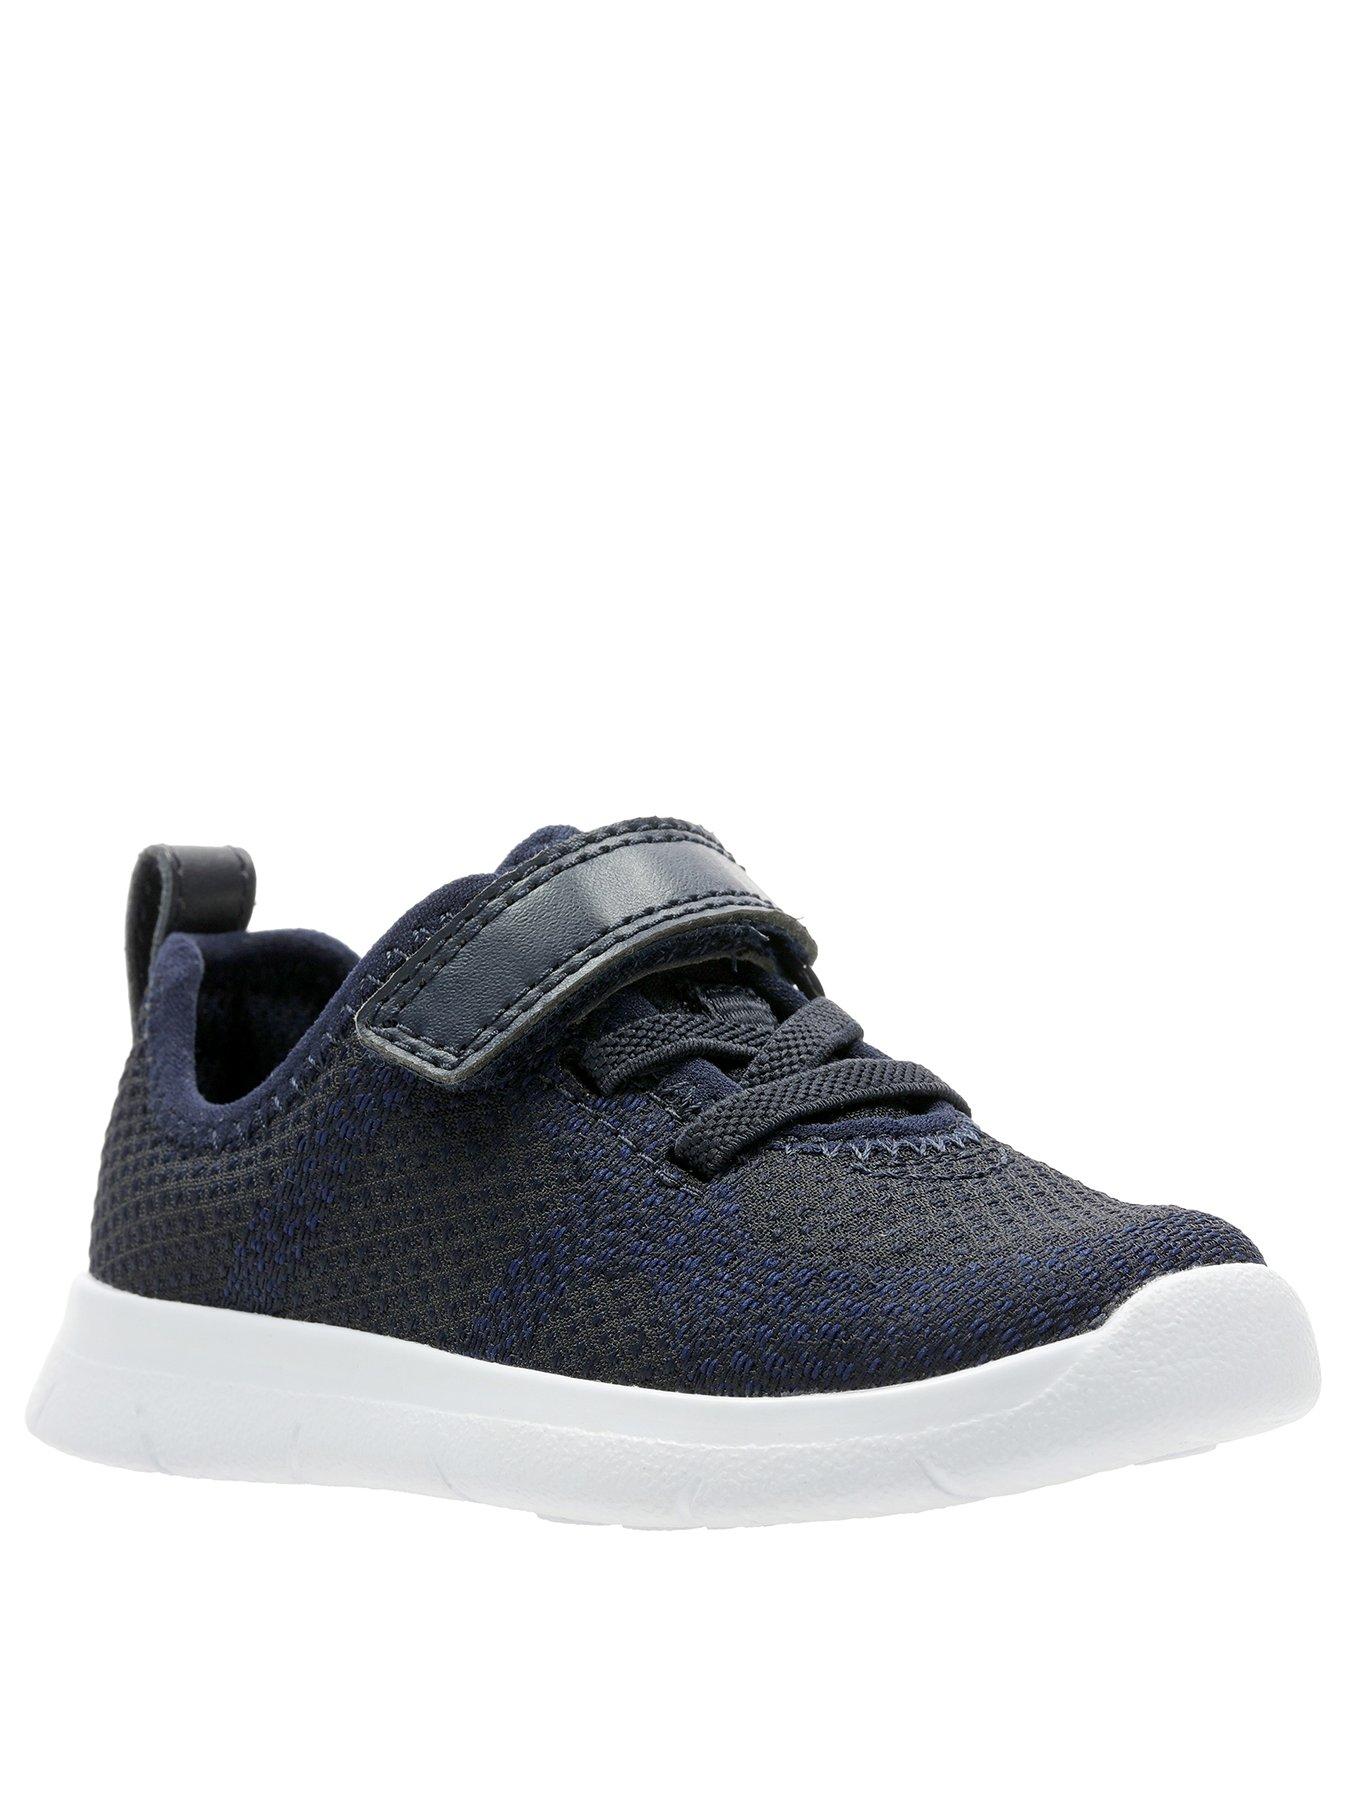  Ath Flux Toddler Trainers - Navy